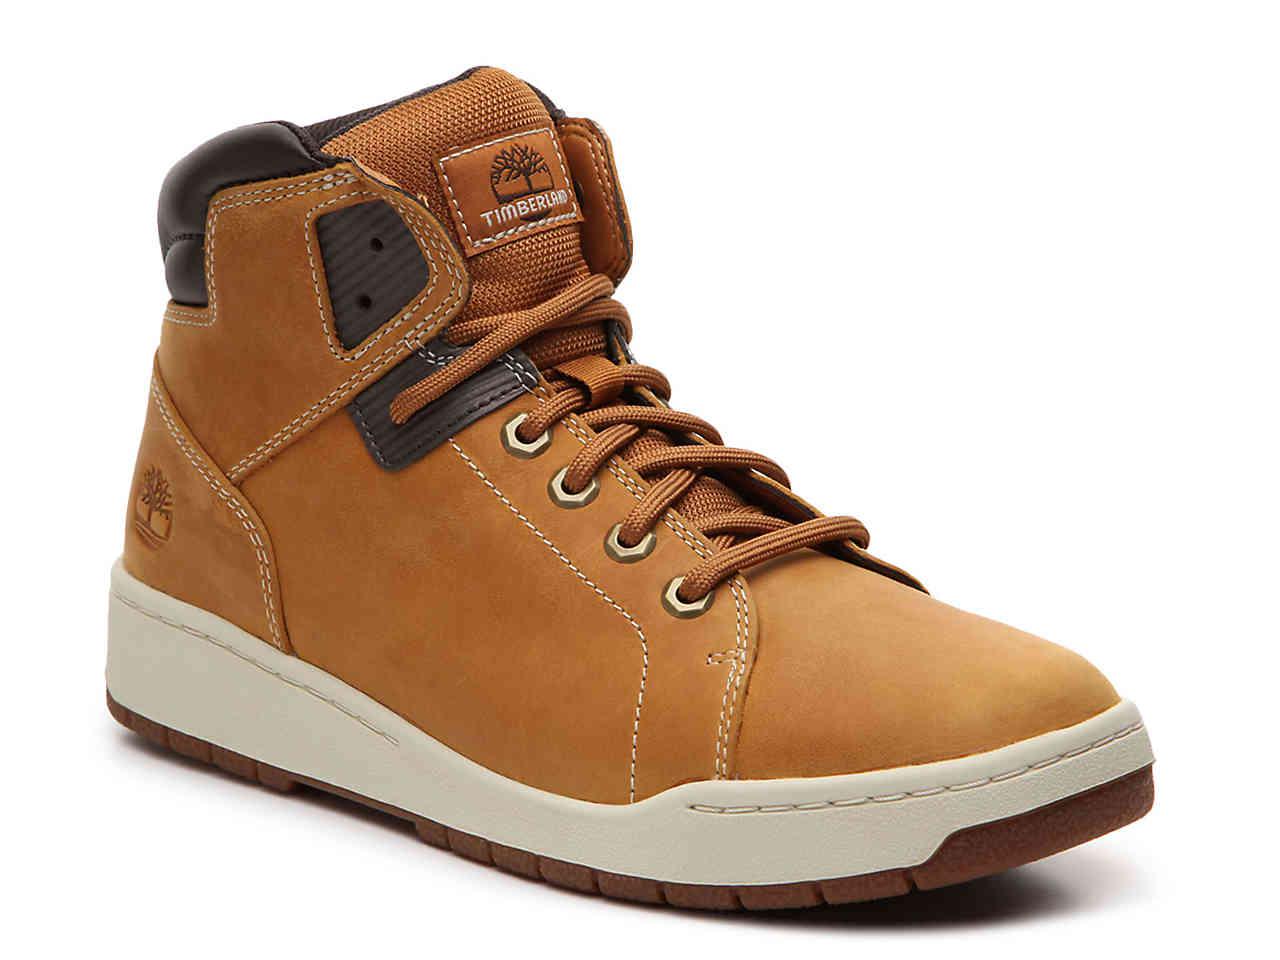 Raystown High-top Sneaker Boot 